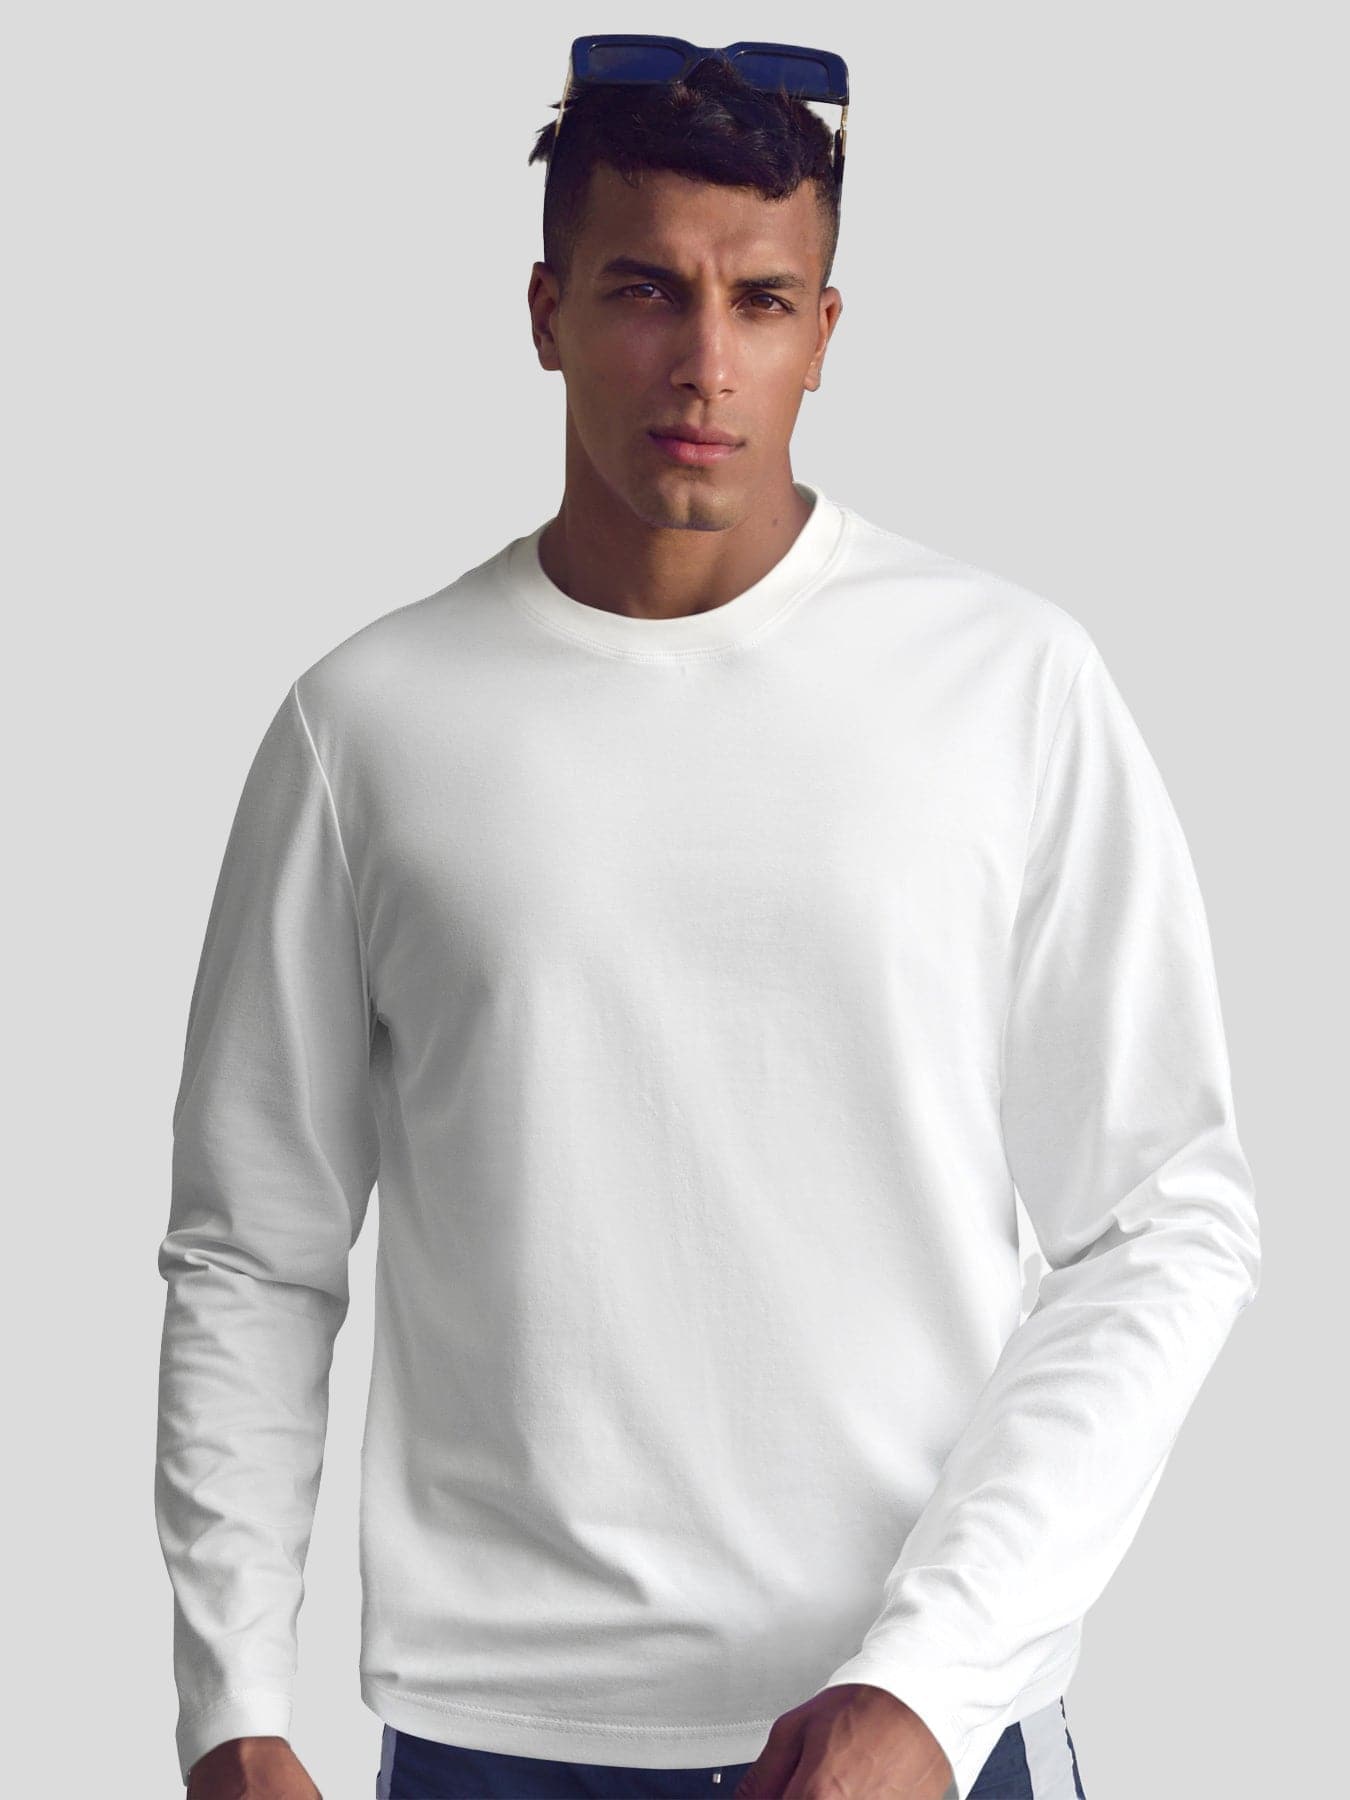 Long-Sleeve Stain Resistant T-shirt